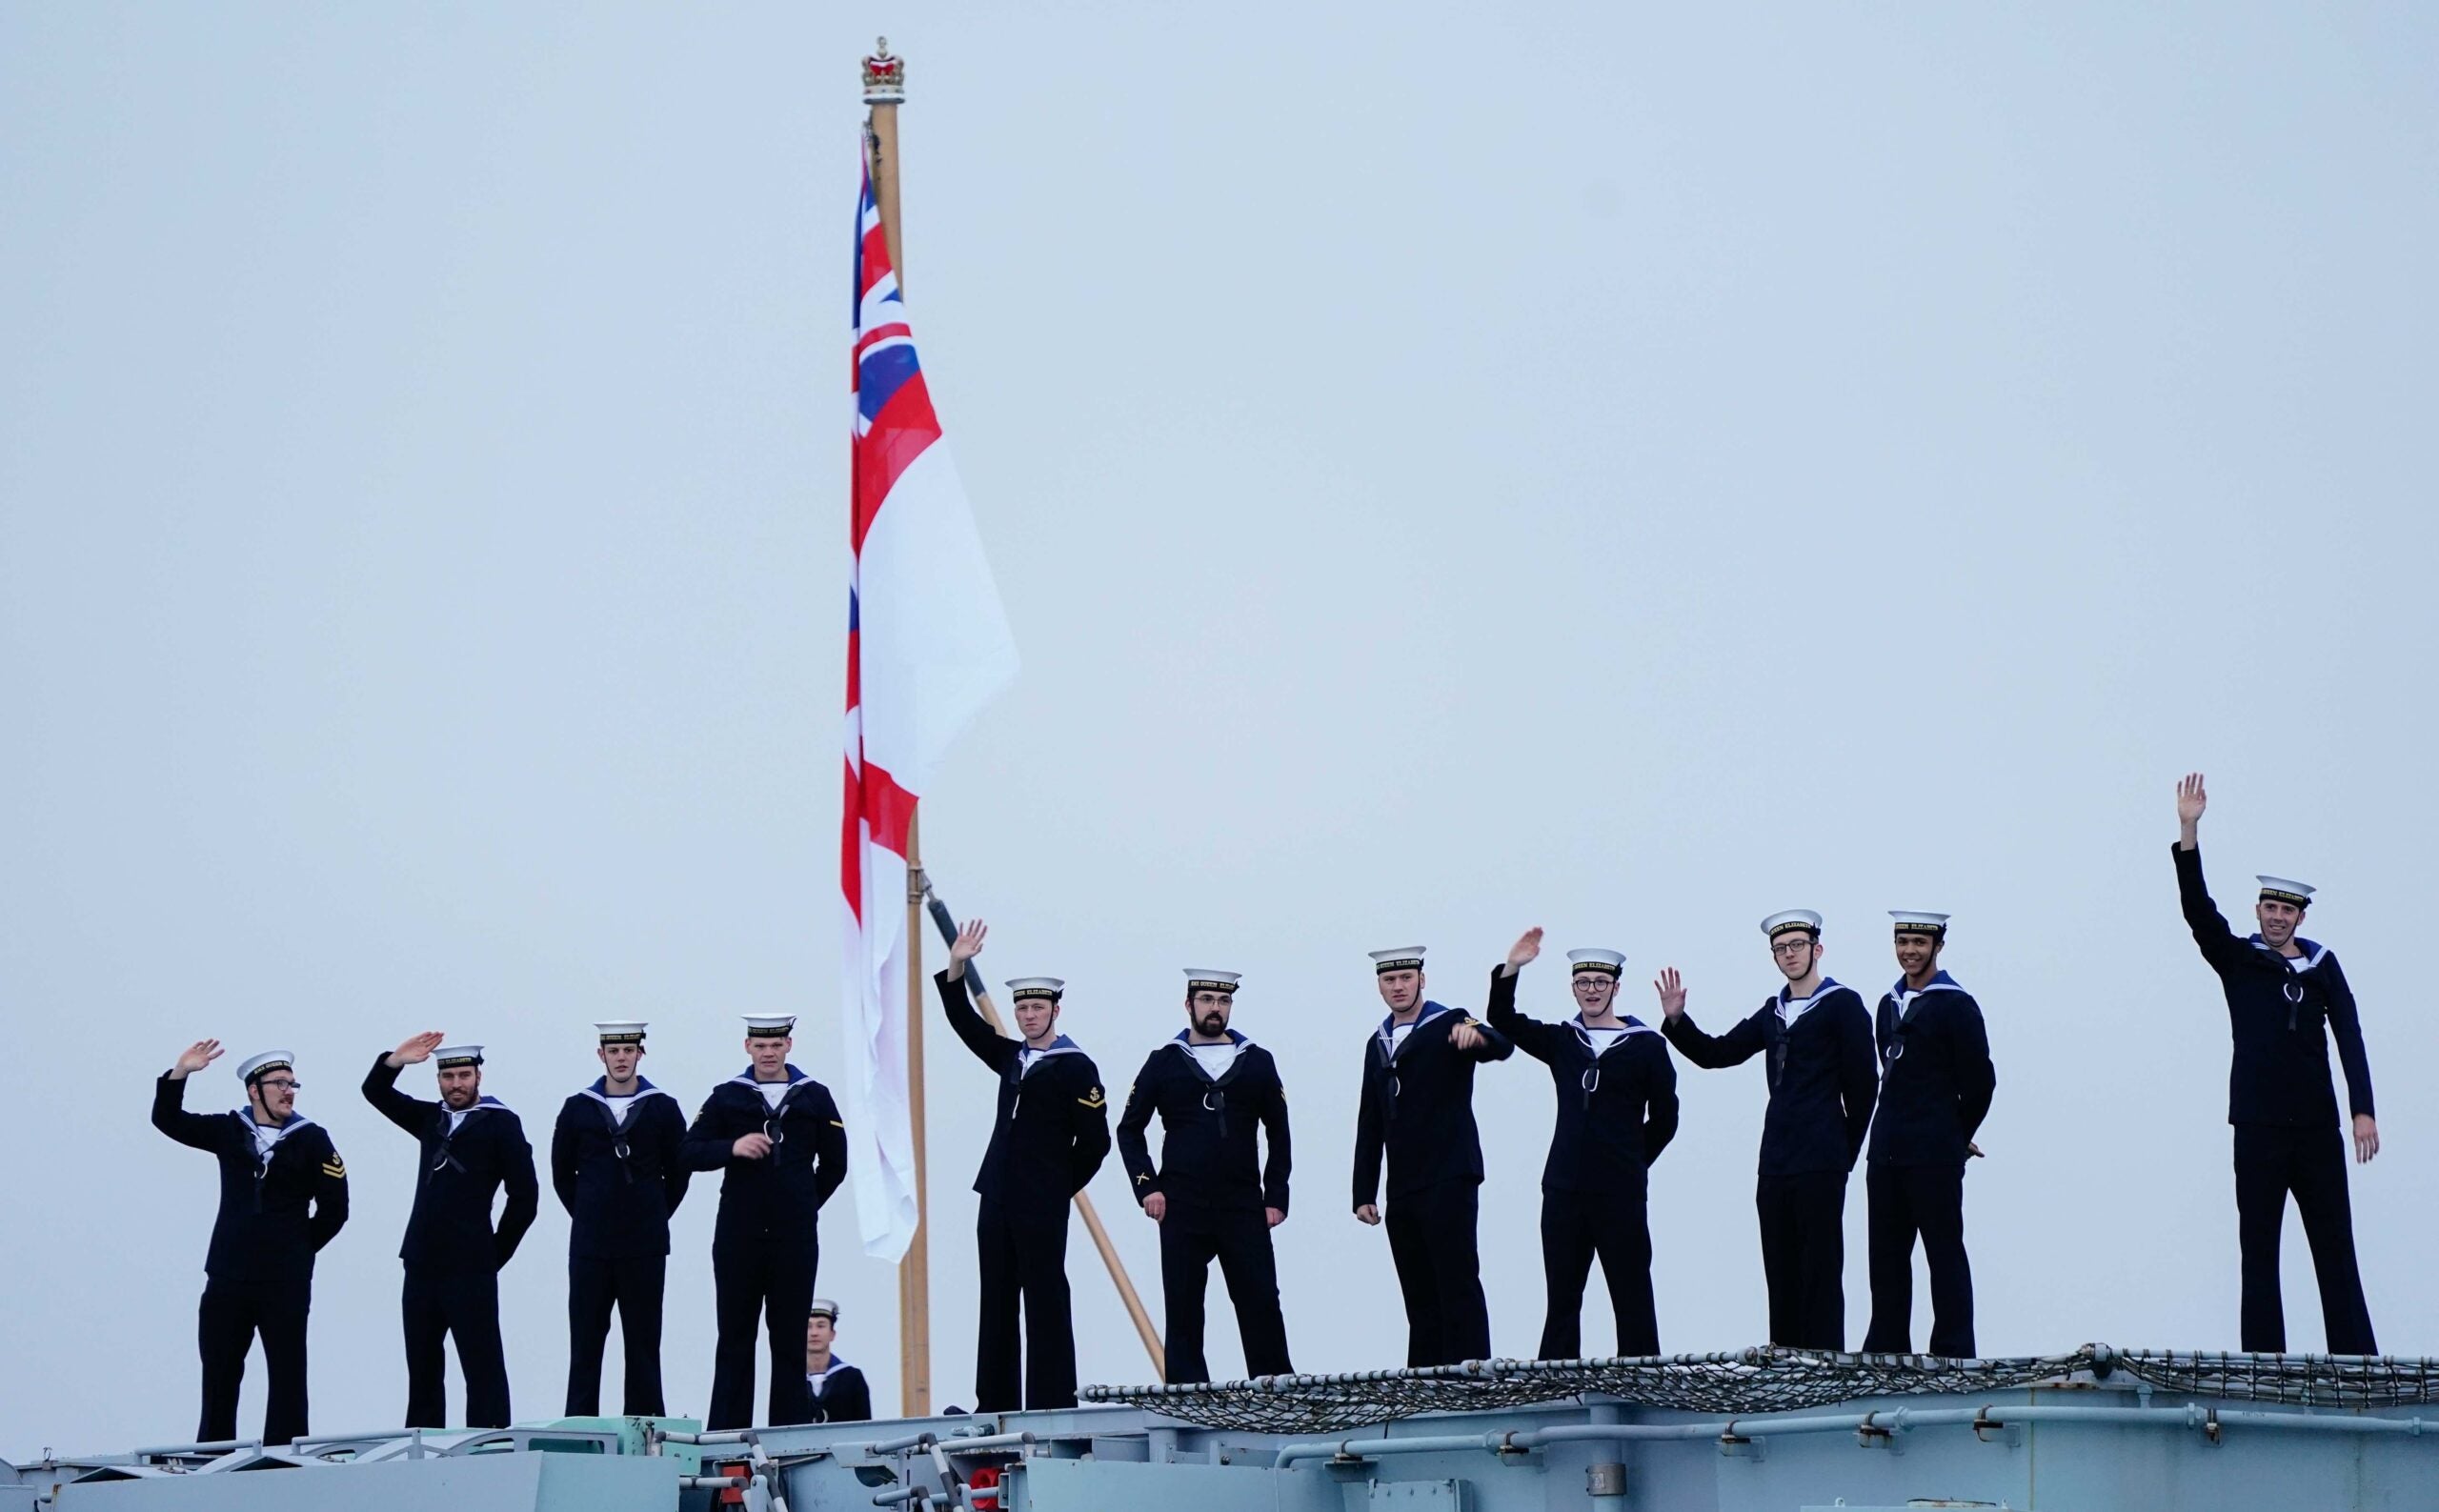 Sailors on board wave towards the Round Tower as the Royal Navy's aircraft carrier HMS Queen Elizabeth returns to Portsmouth Naval Base following her deployment to the Far East. Picture date: Thursday December 9, 2021. (Photo by Andrew Matthews/PA Images via Getty Images)